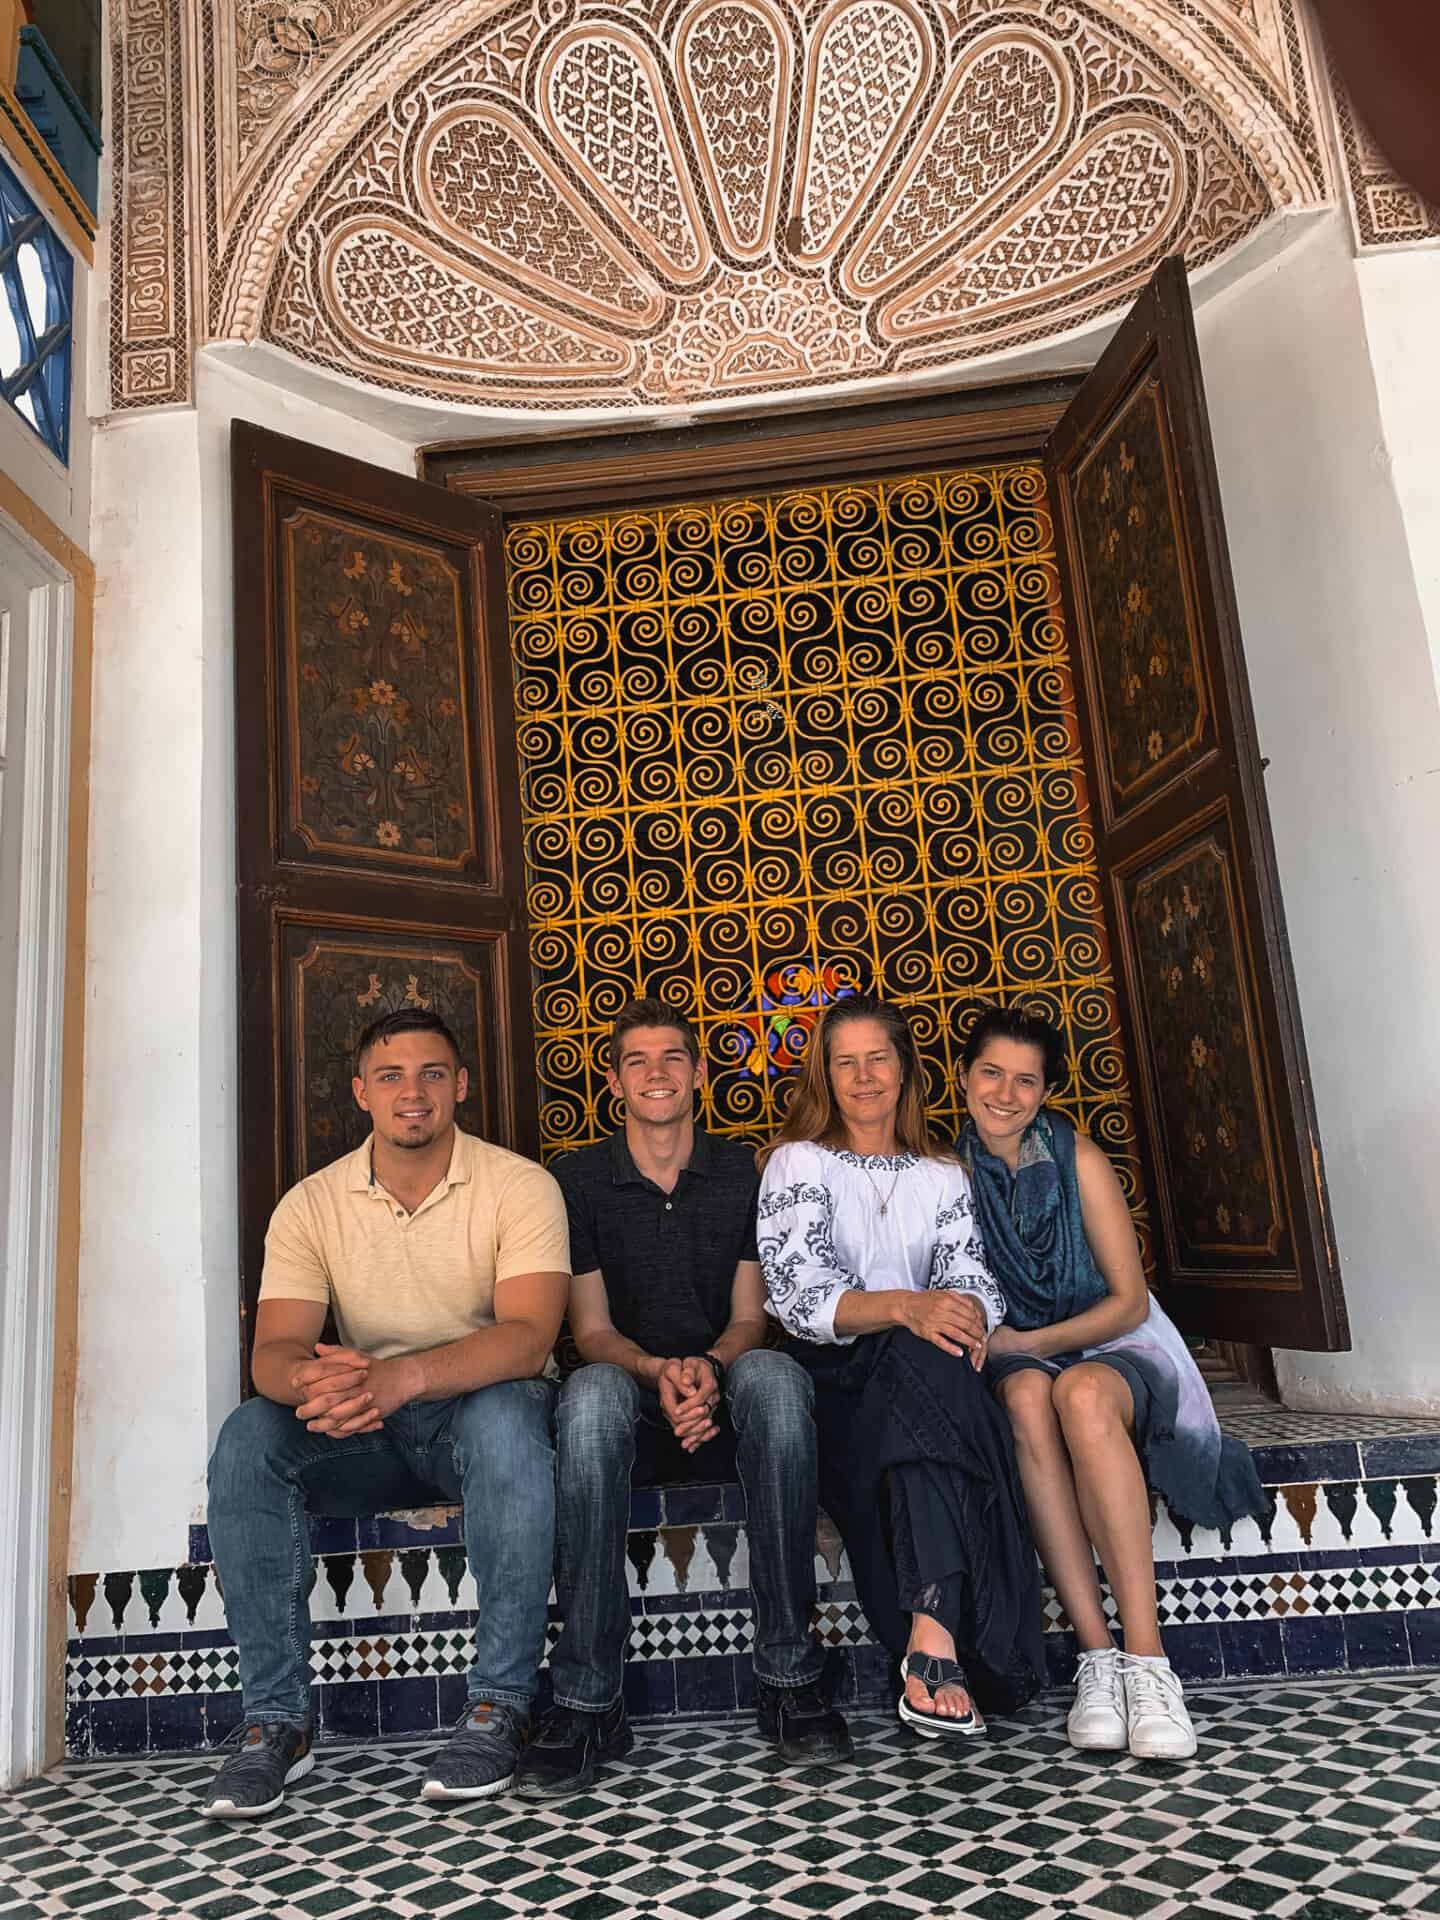 four tourists sitting by a Golden Window in Museum Marrakech Morocco